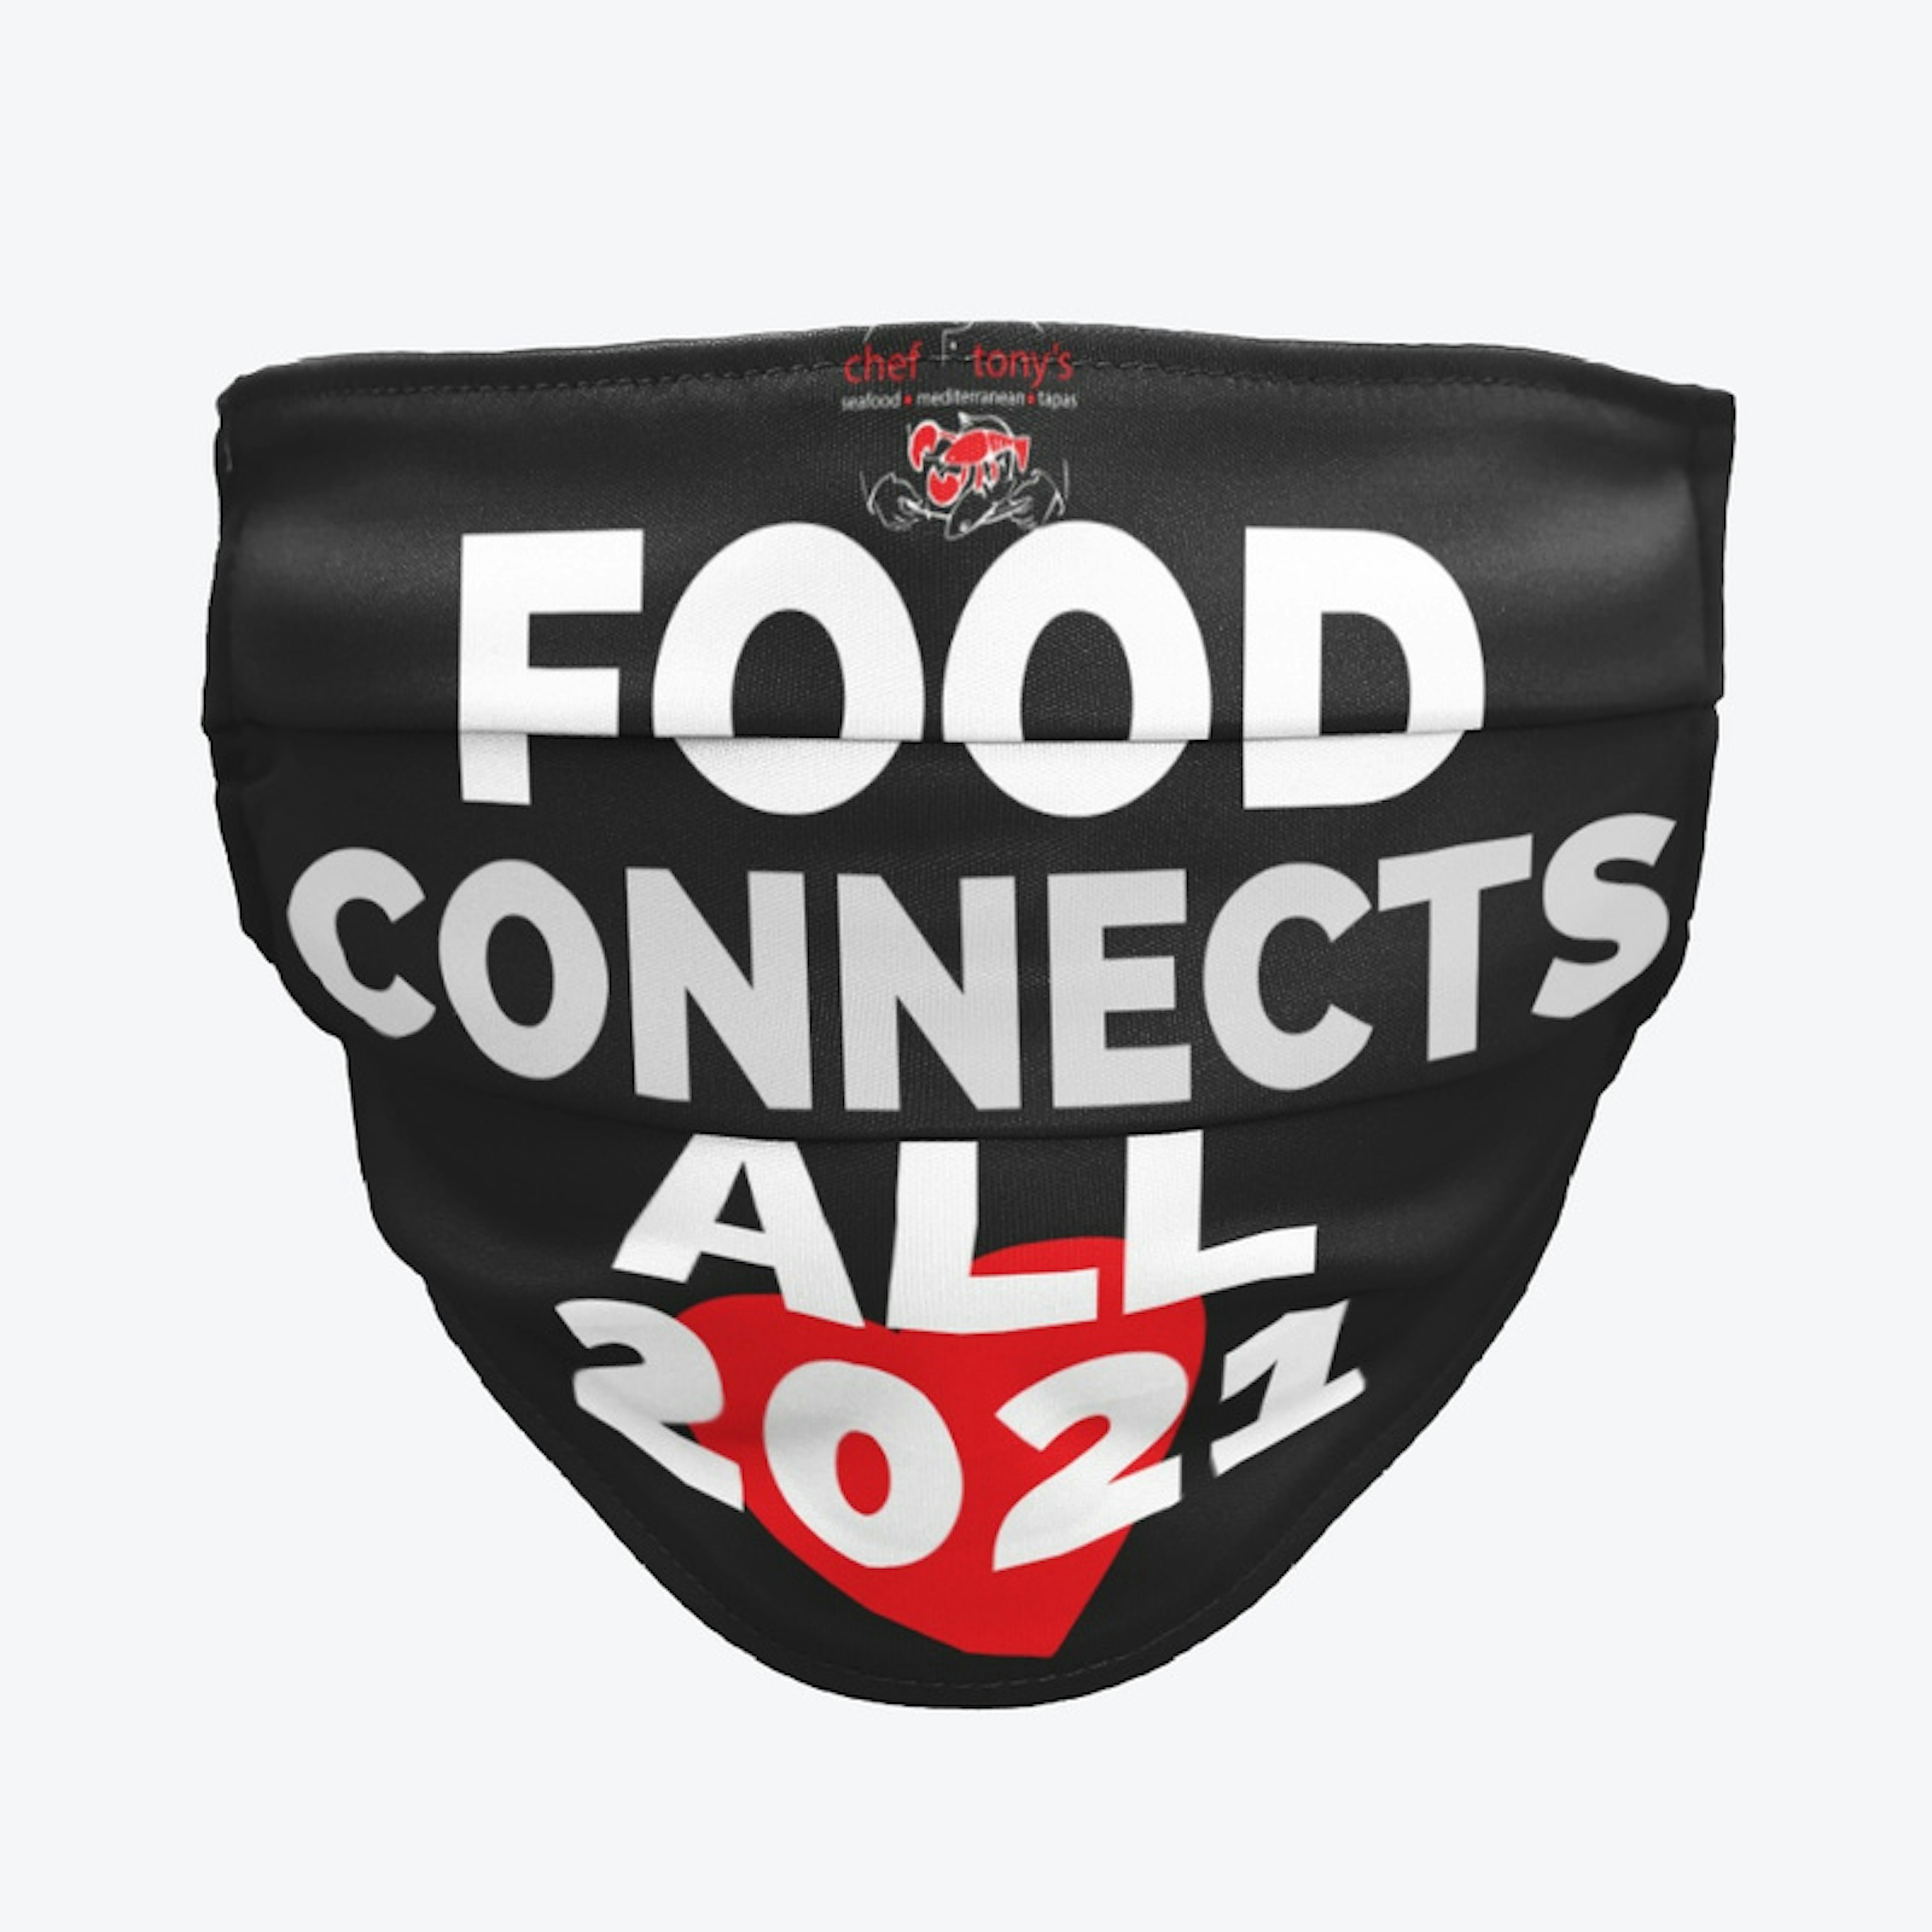 2021 Food Connects All!